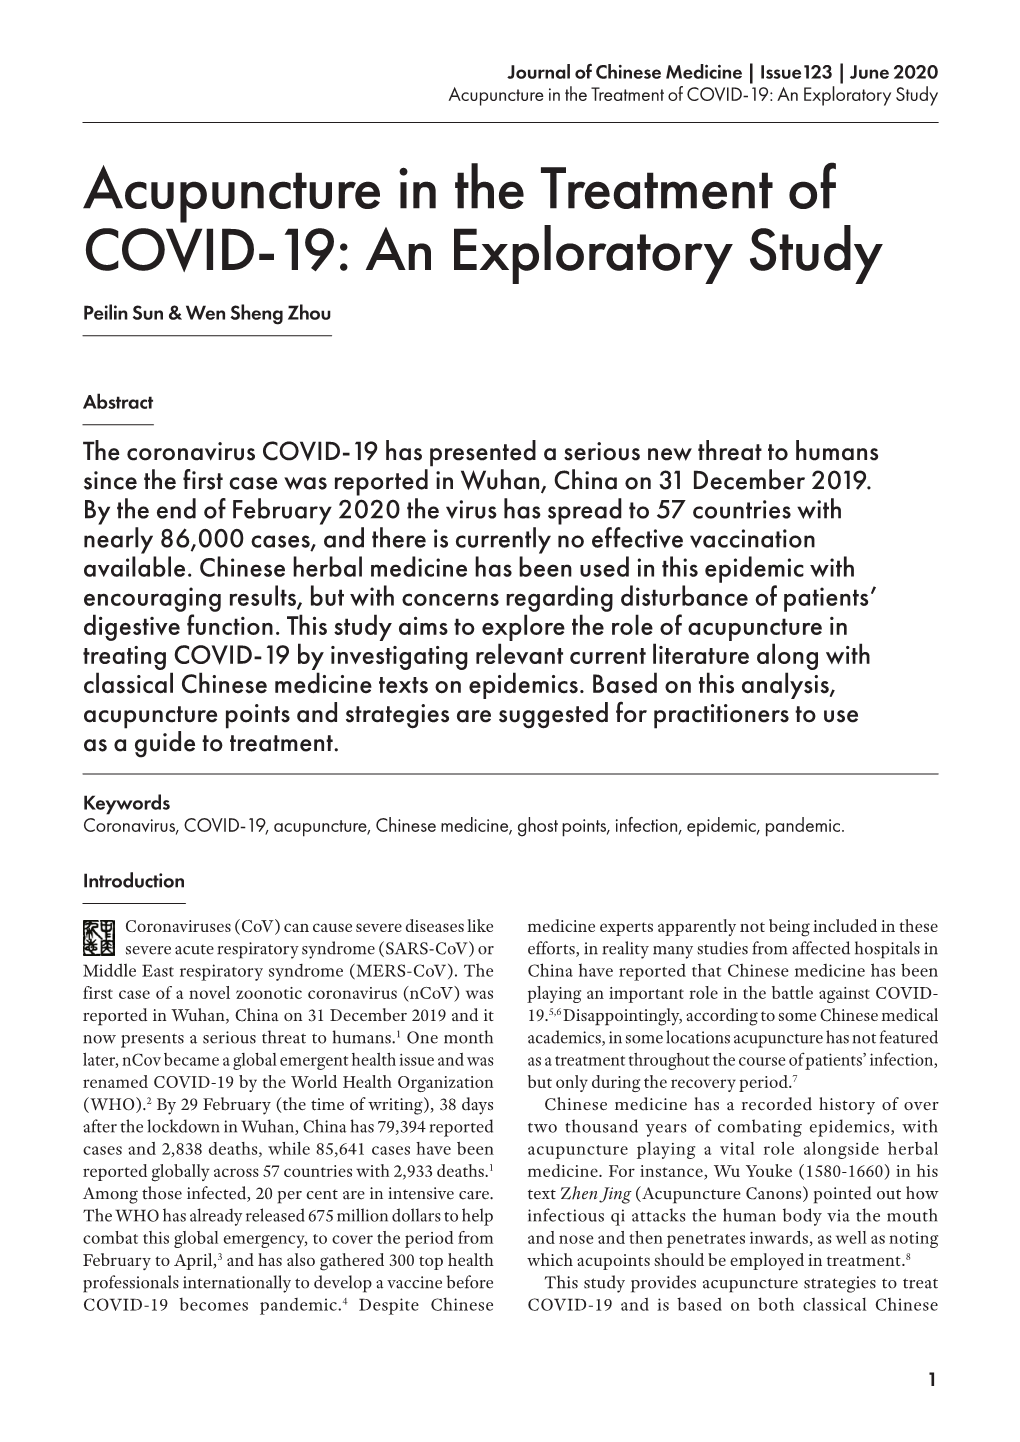 Acupuncture in the Treatment of COVID-19: an Exploratory Study Acupuncture in the Treatment of COVID-19: an Exploratory Study Peilin Sun & Wen Sheng Zhou